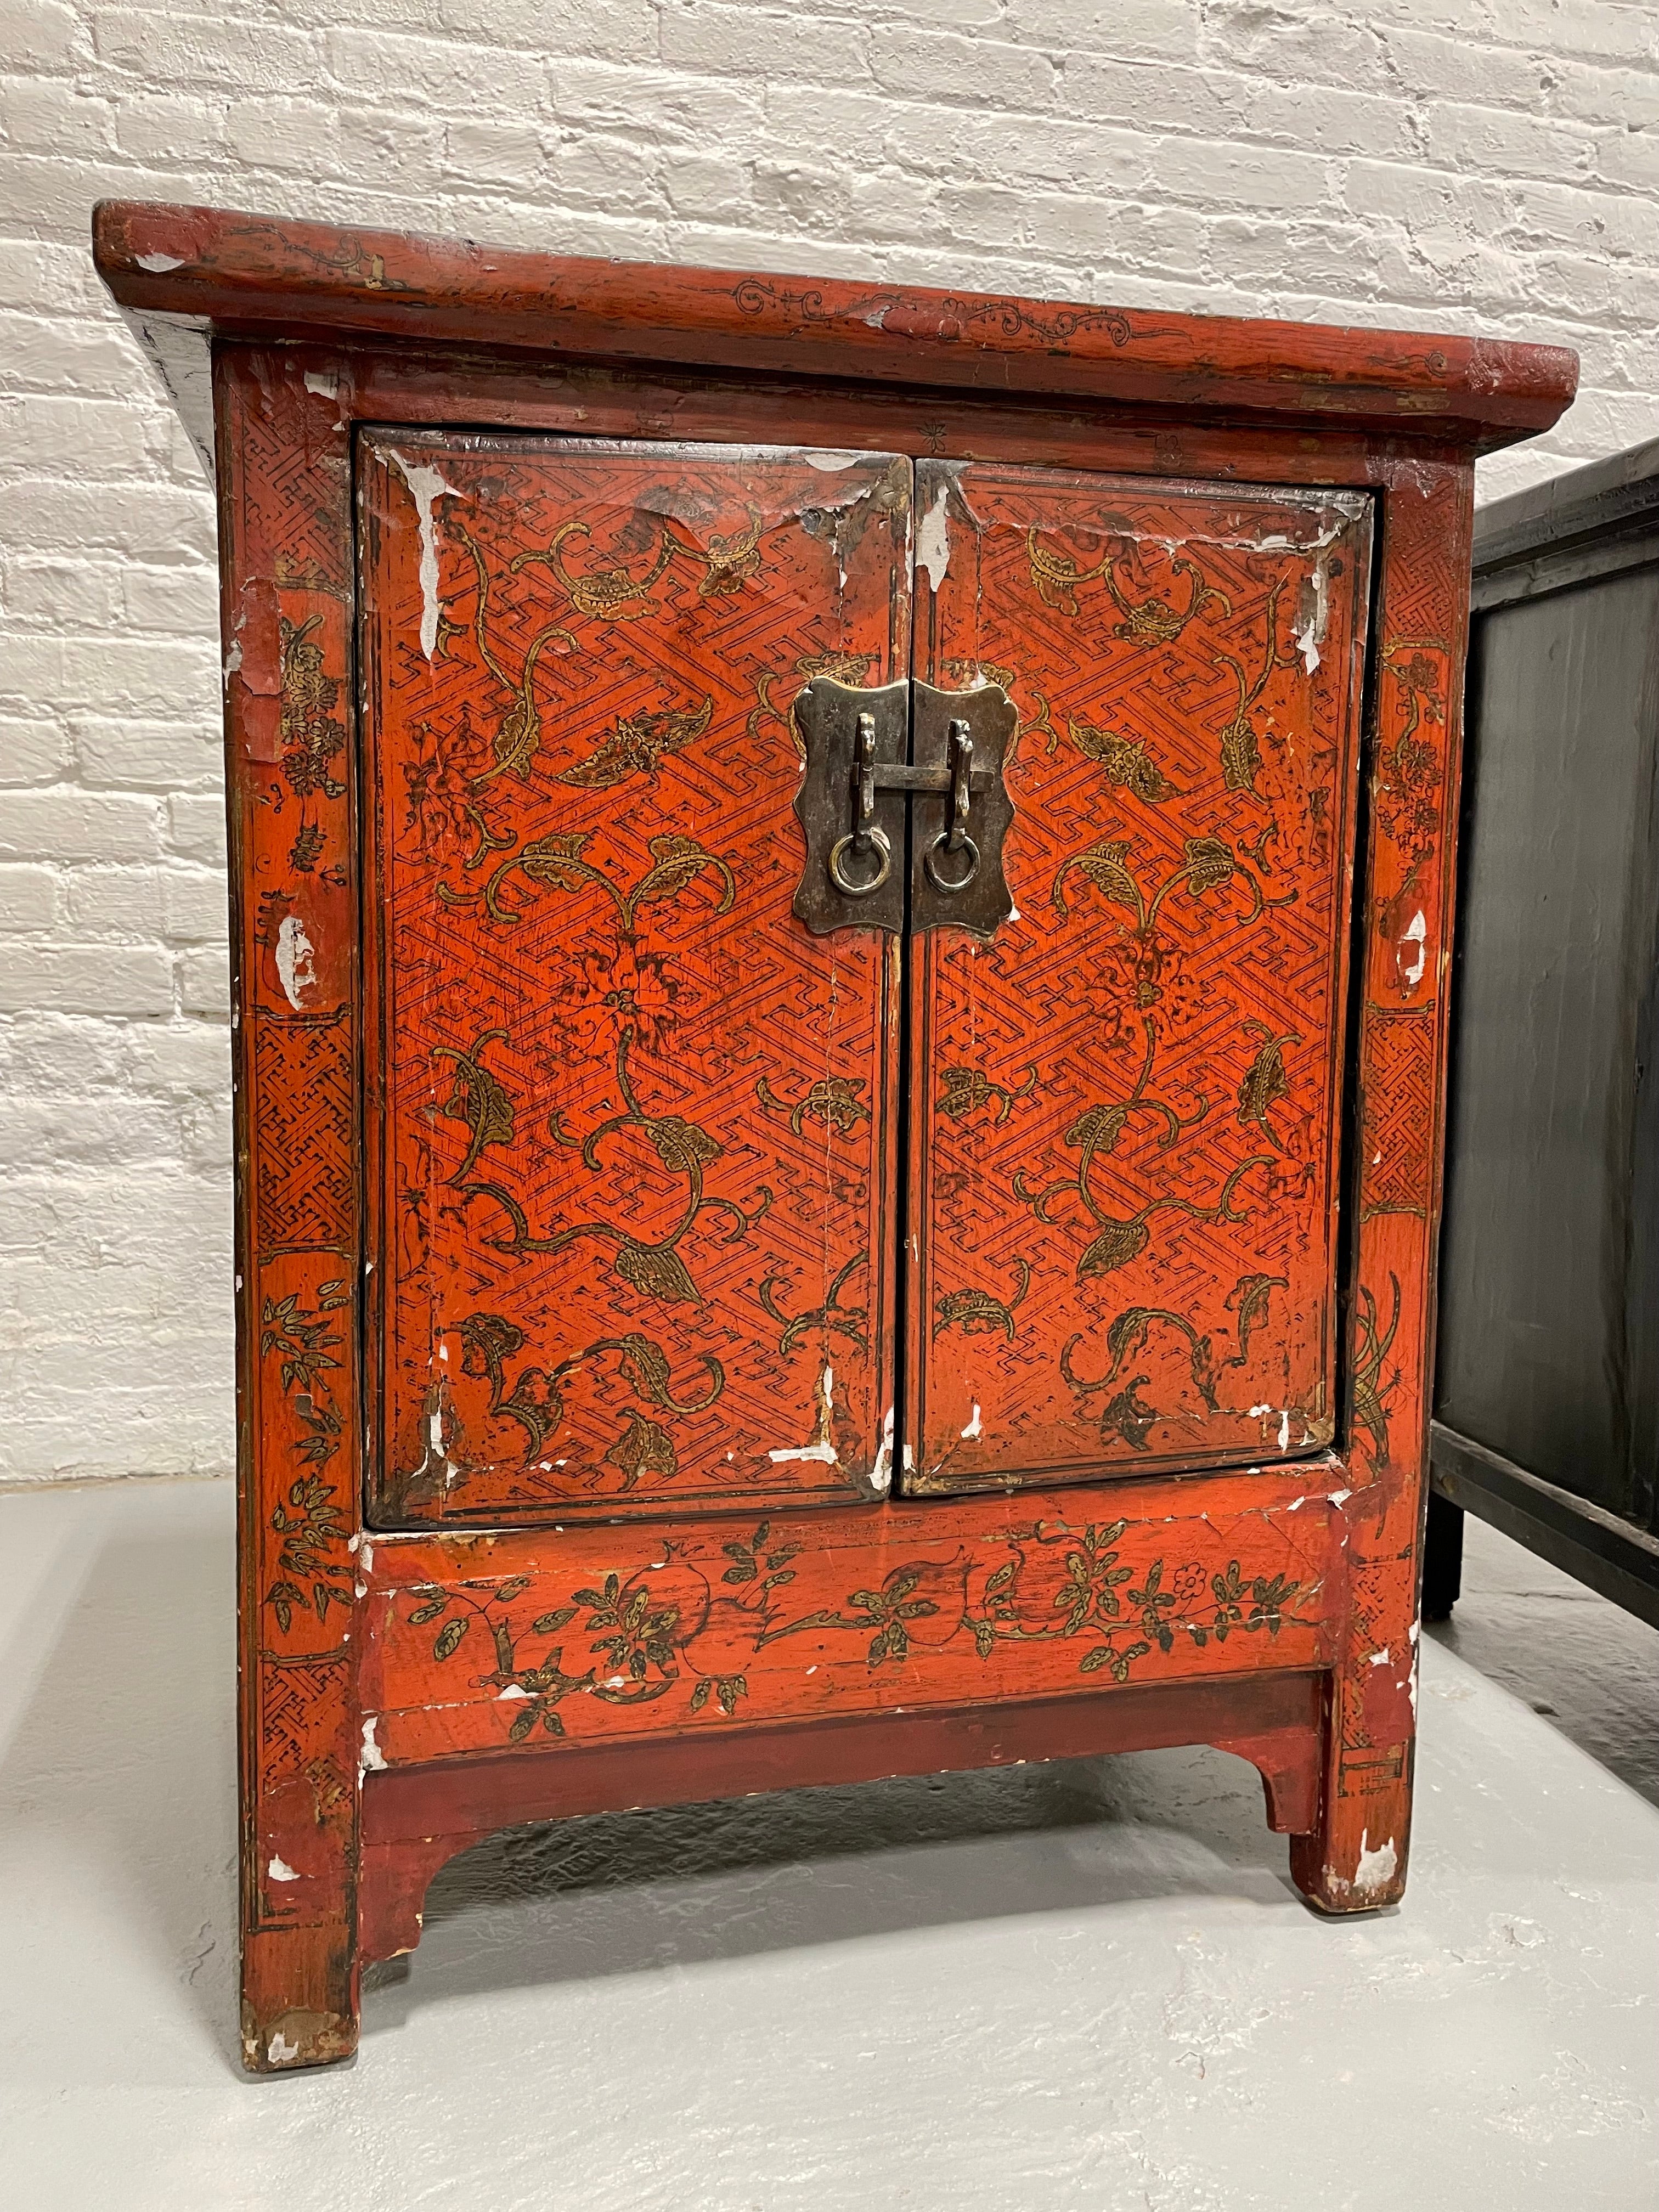 Antique Red Lacquer Chinese "Marriage Cabinets" STORAGE CHESTS